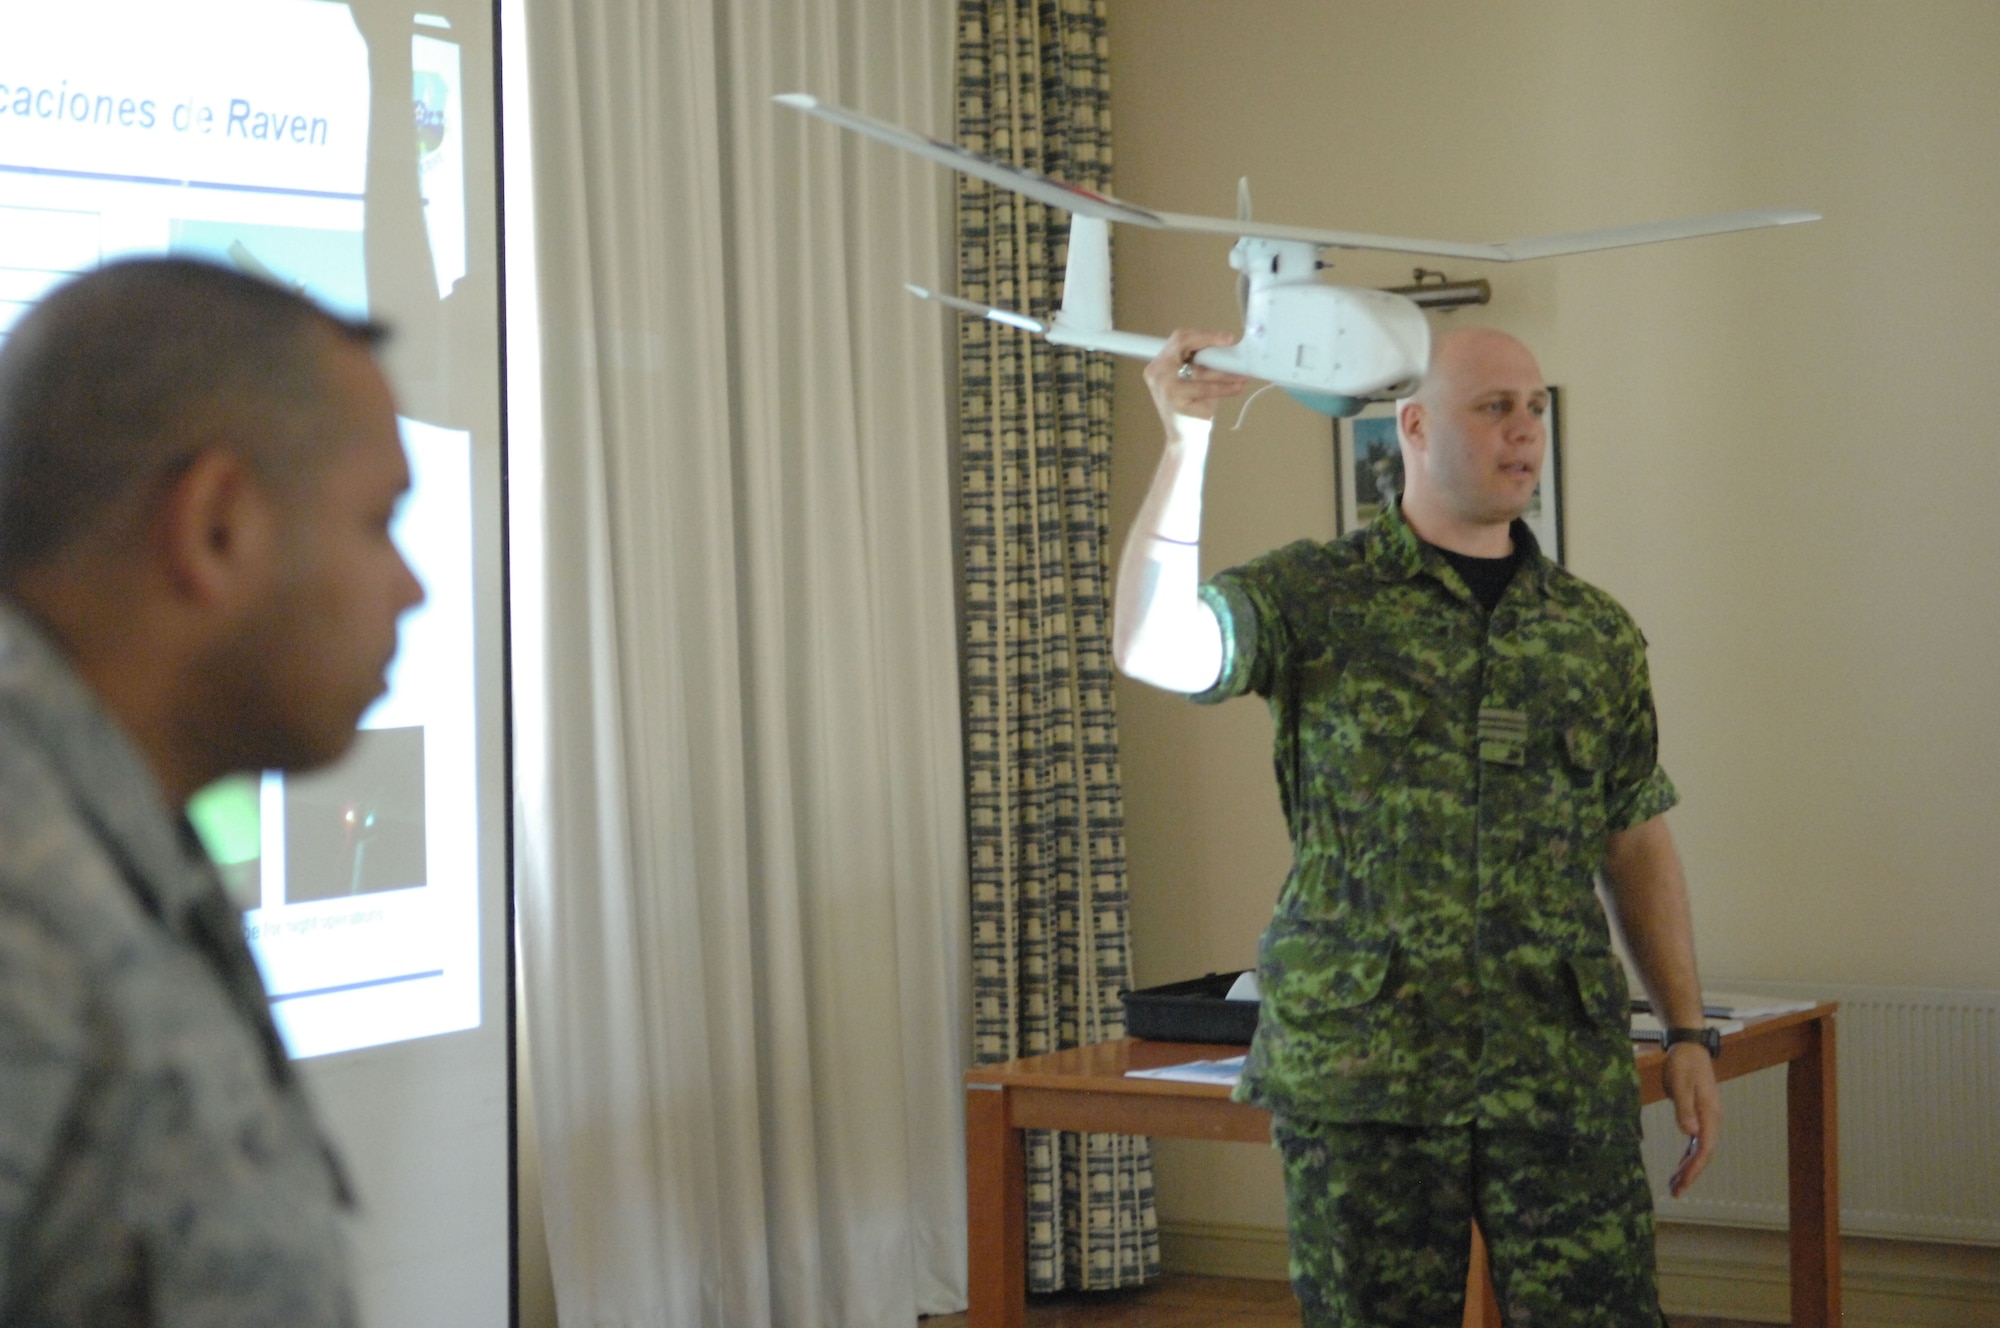 Canadian army Maj. Brian Nekurak (right) an officer in the foreign exchange program, demonstrates the use and capabilities of the small, unmanned aerial system Oct. 29 while Master Sgt. Edward Nin translates Major Nekurak's words into Spanish at Quintero Air Base, Chile during Operation Southern Partner. Operation Southern Partner is an in-depth, two-week subject matter exchange emphasizing partnership, cooperation and sharing of information with partner nation Air Forces  in Latin America. 
(U.S. Air Force Photo by TSgt Roy Santana, Released)